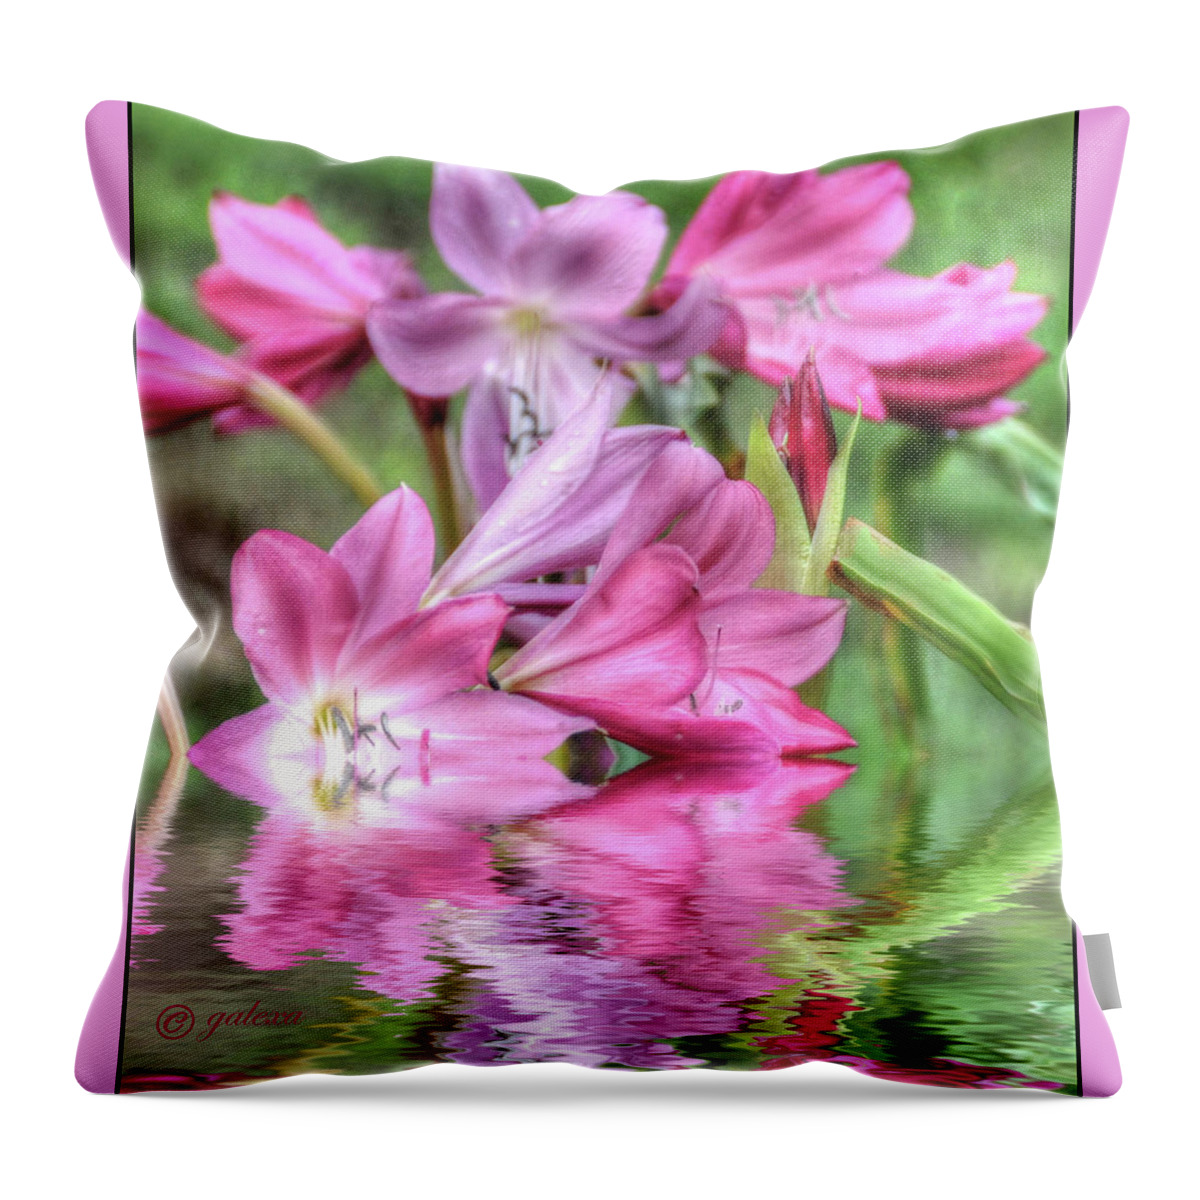 Flowers Throw Pillow featuring the photograph Pink Lily Flood by Geraldine Alexander